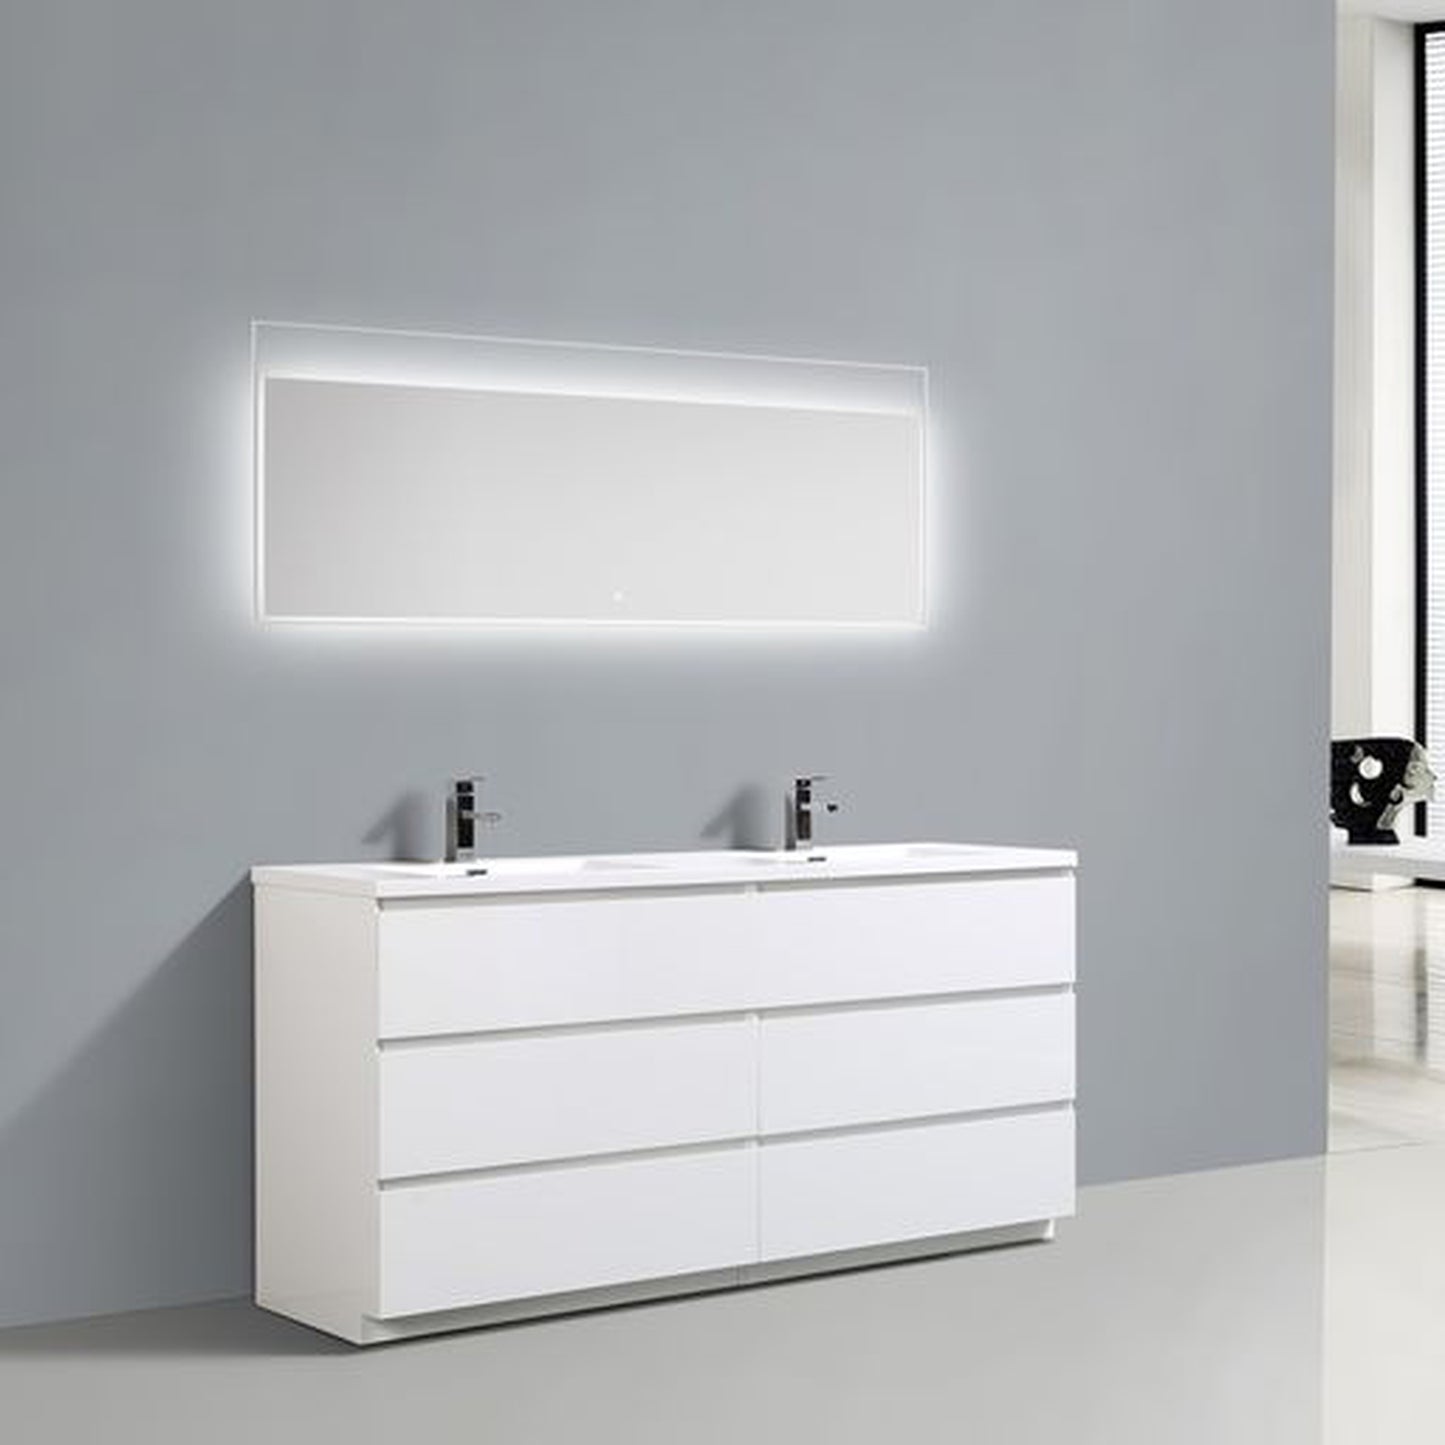 Moreno Bath Angeles 72" High Gloss White Freestanding Vanity With Double Reinforced White Acrylic Sinks